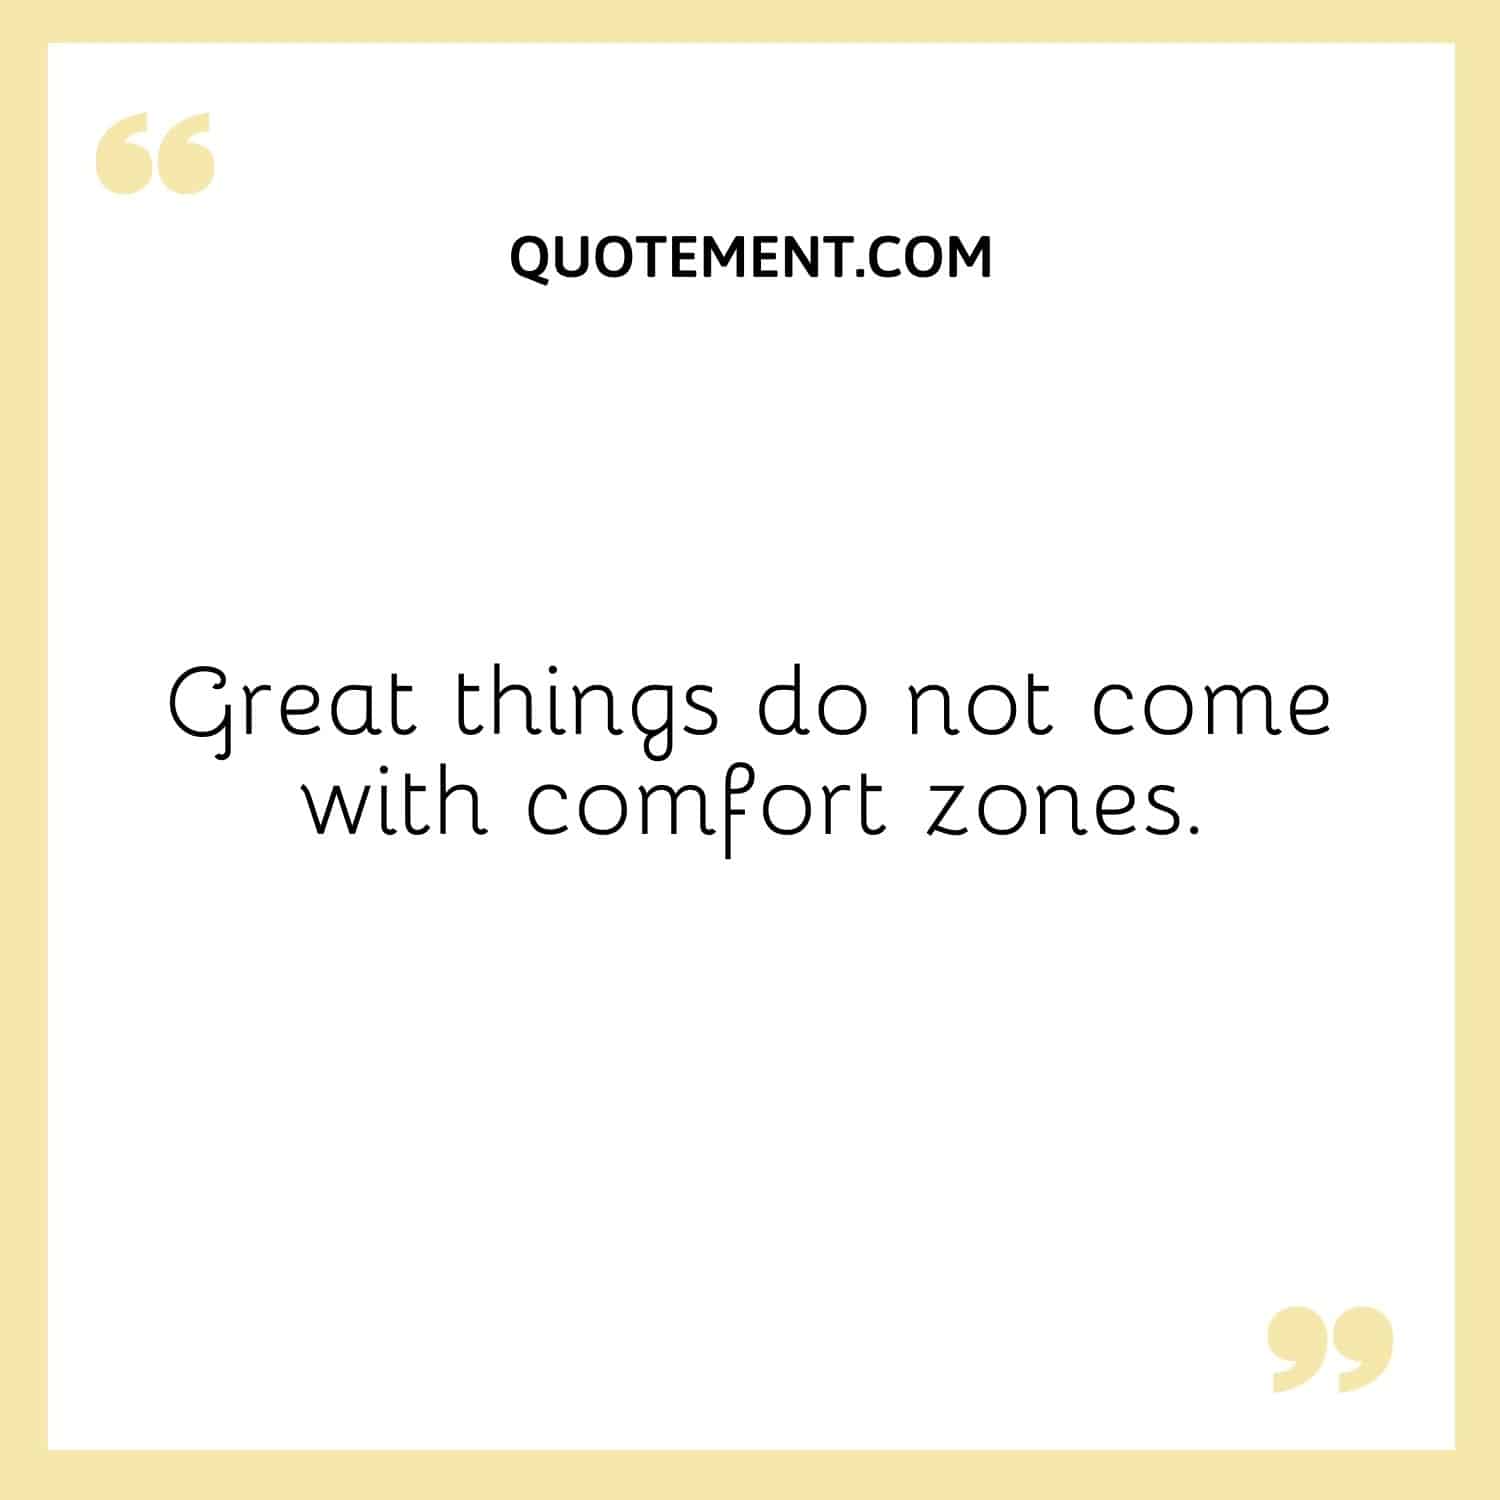 Great things do not come with comfort zones.